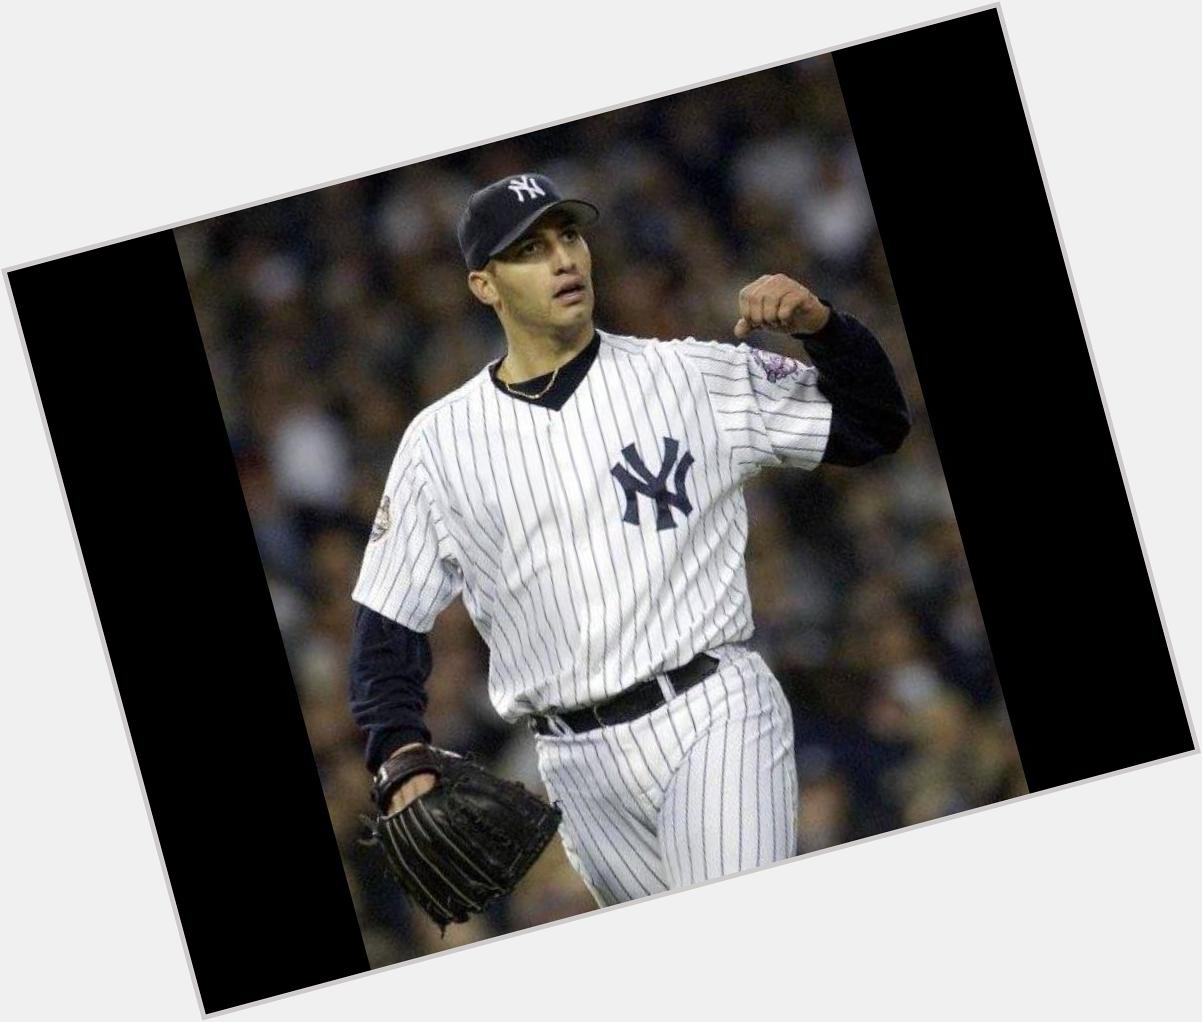 Happy Birthday to one of the member of the Yankees Core 4 Andy Pettitte... 